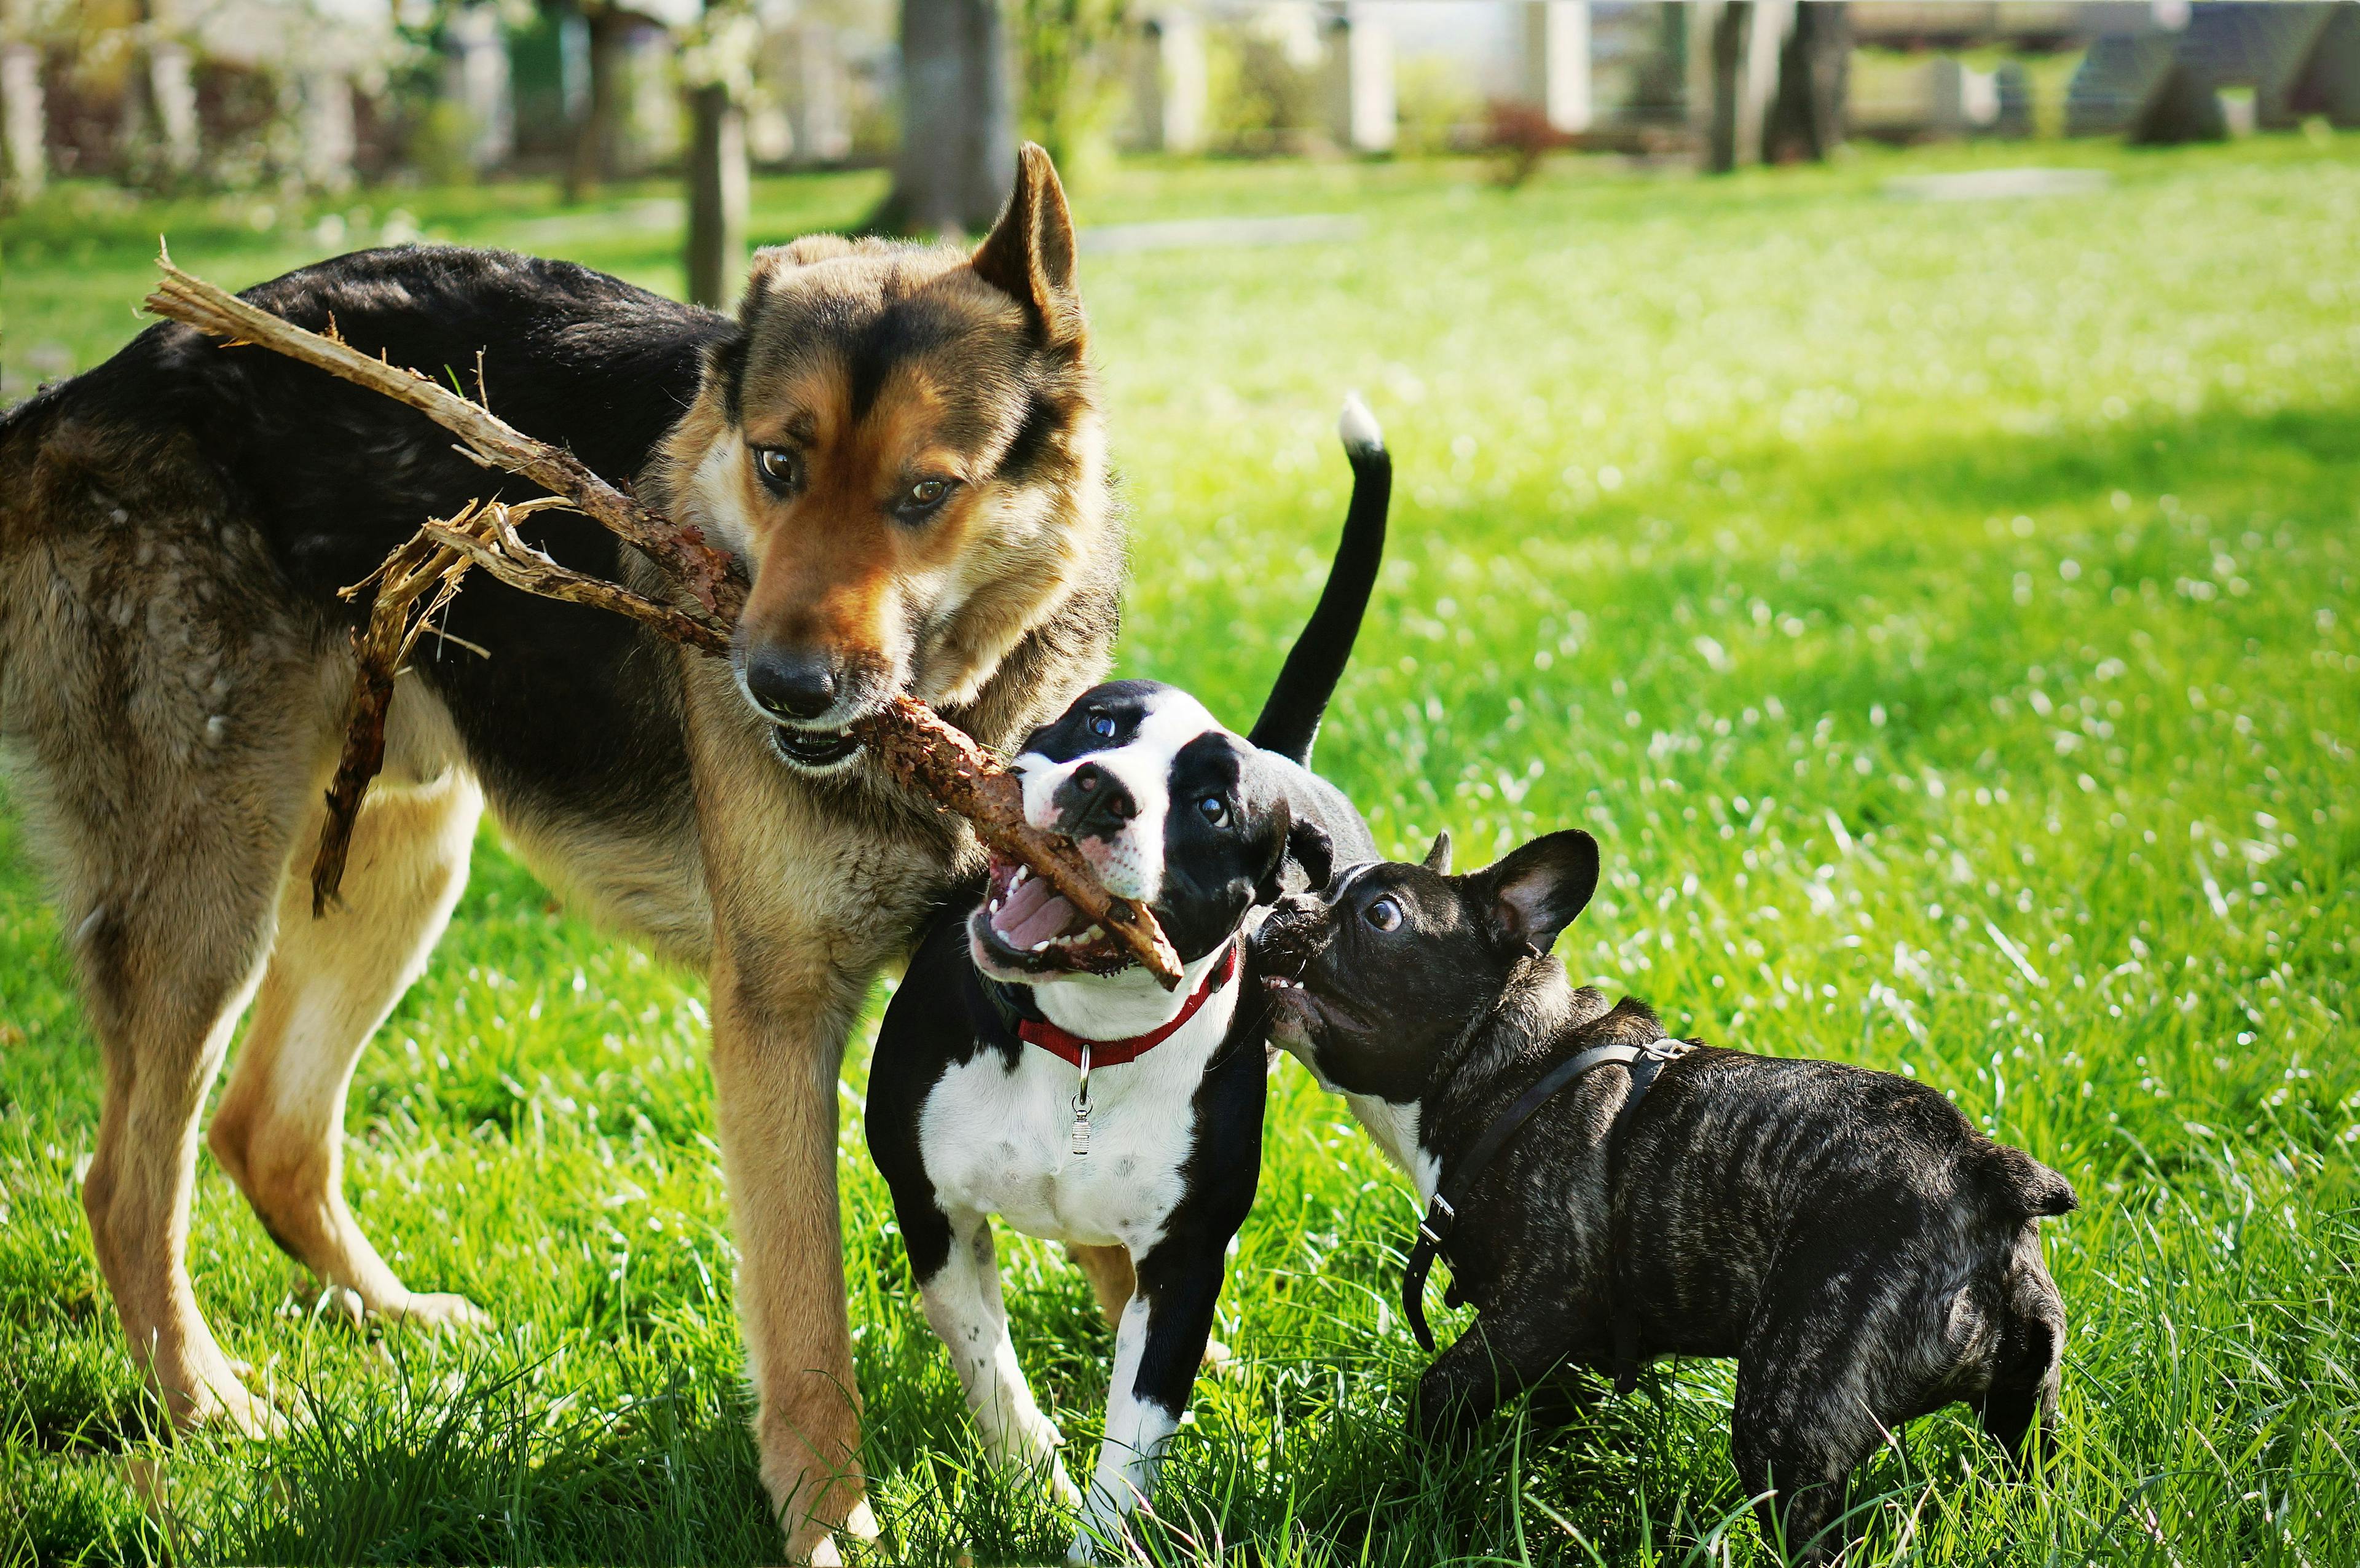 Parasites are playing in America’s dog parks